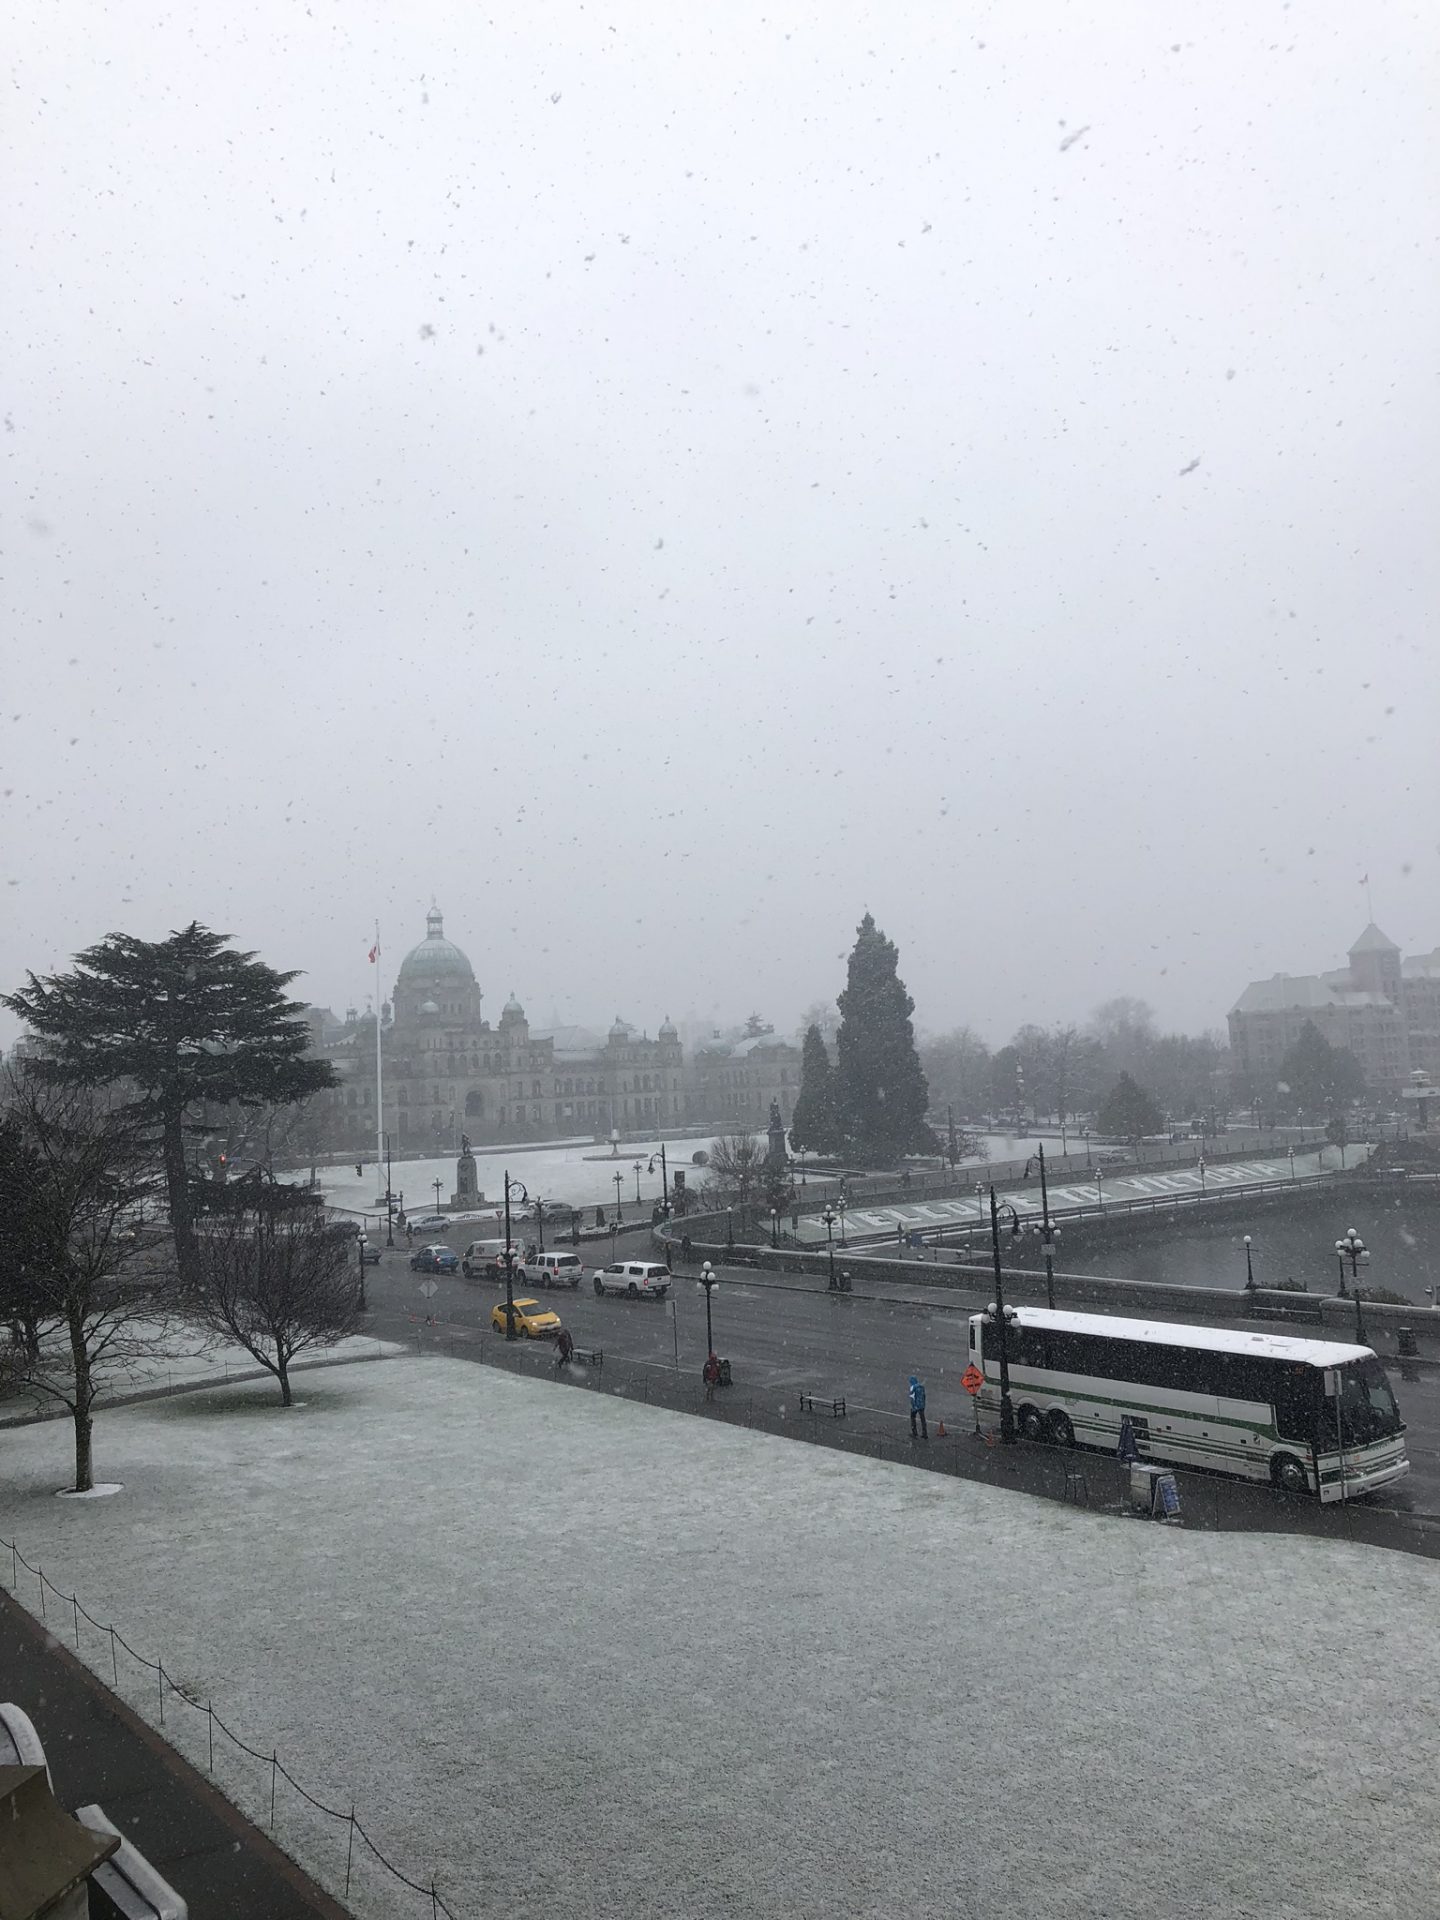 Snow falling over Victoria, British Columbia and the Parliament Building